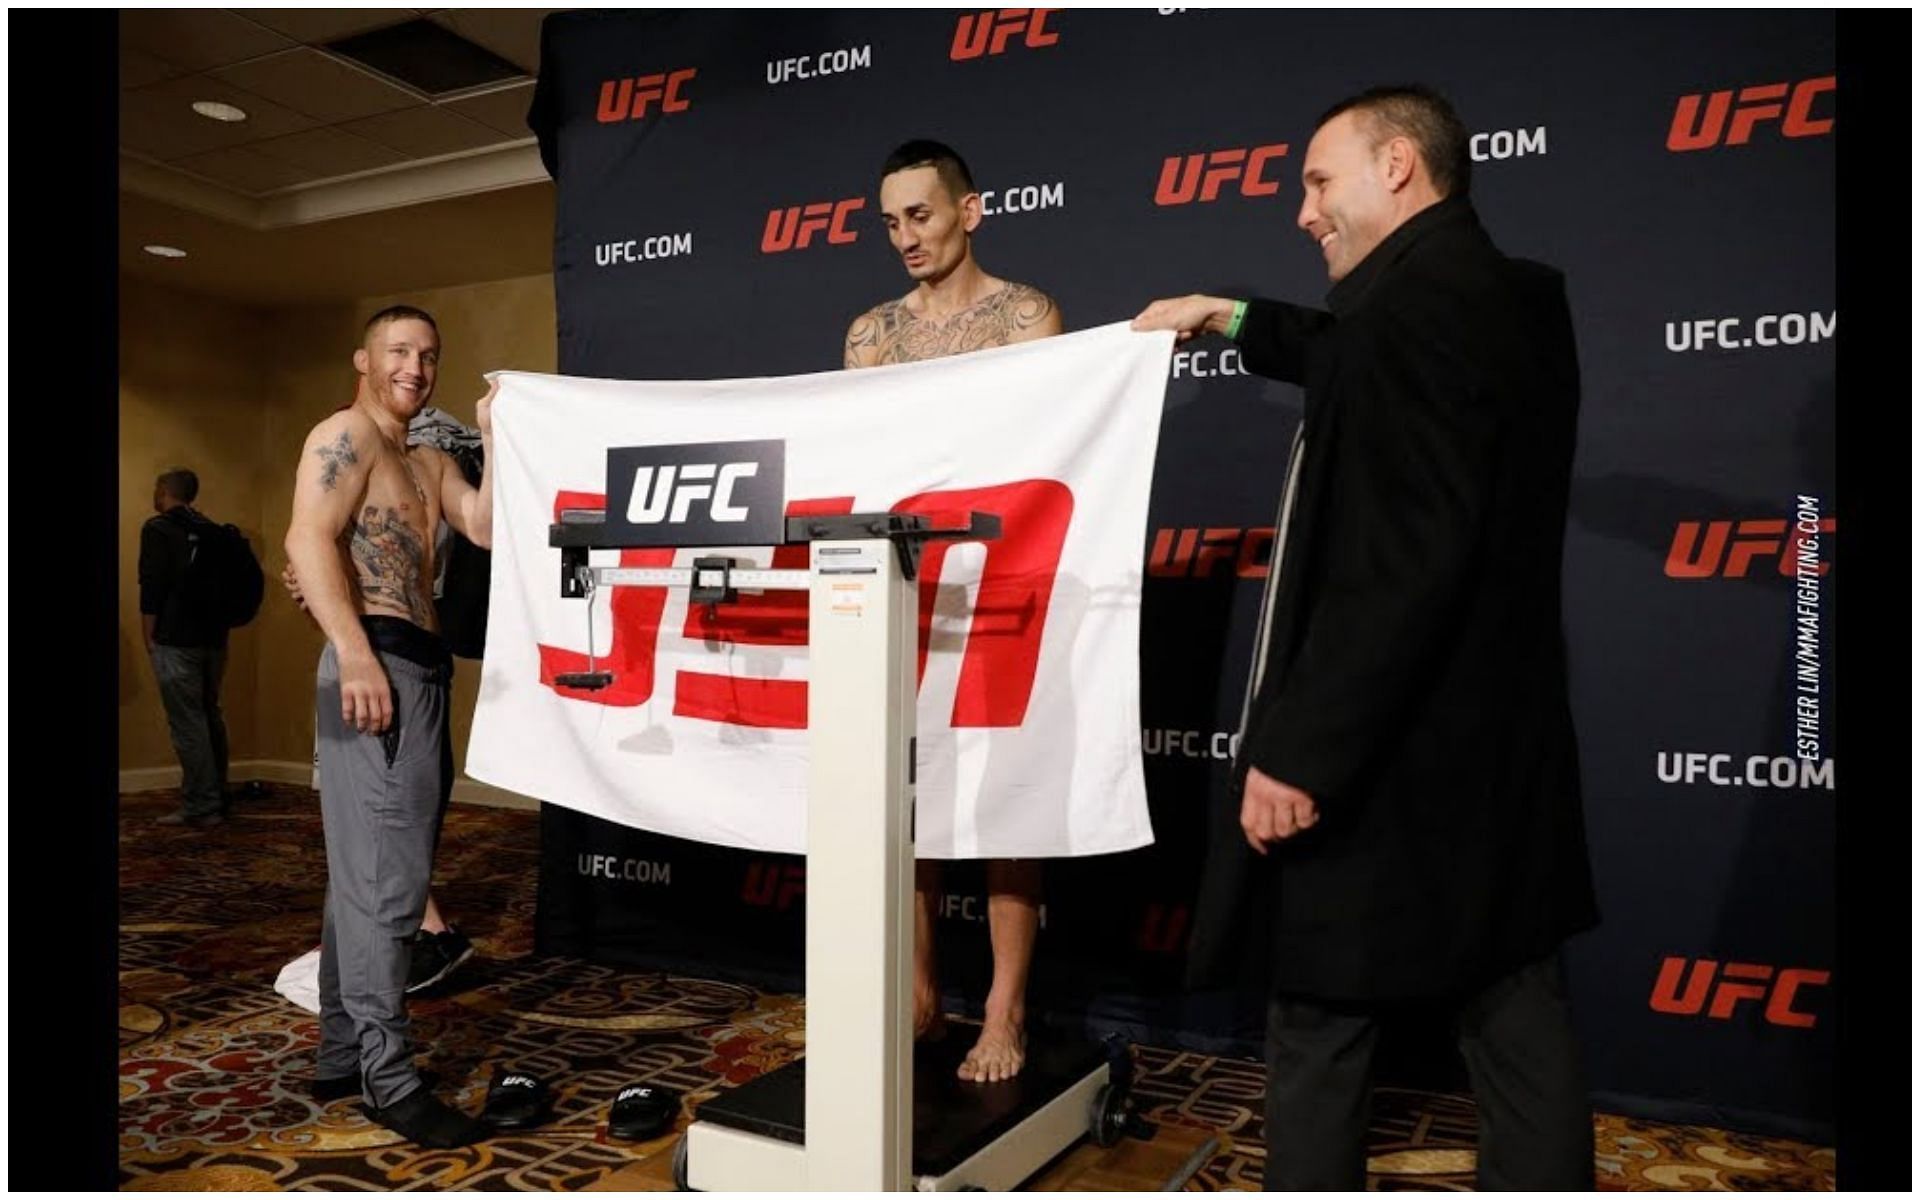 Justin Gaethje holdimg the towel for Max Holloway at UFC 218 weigh-ins